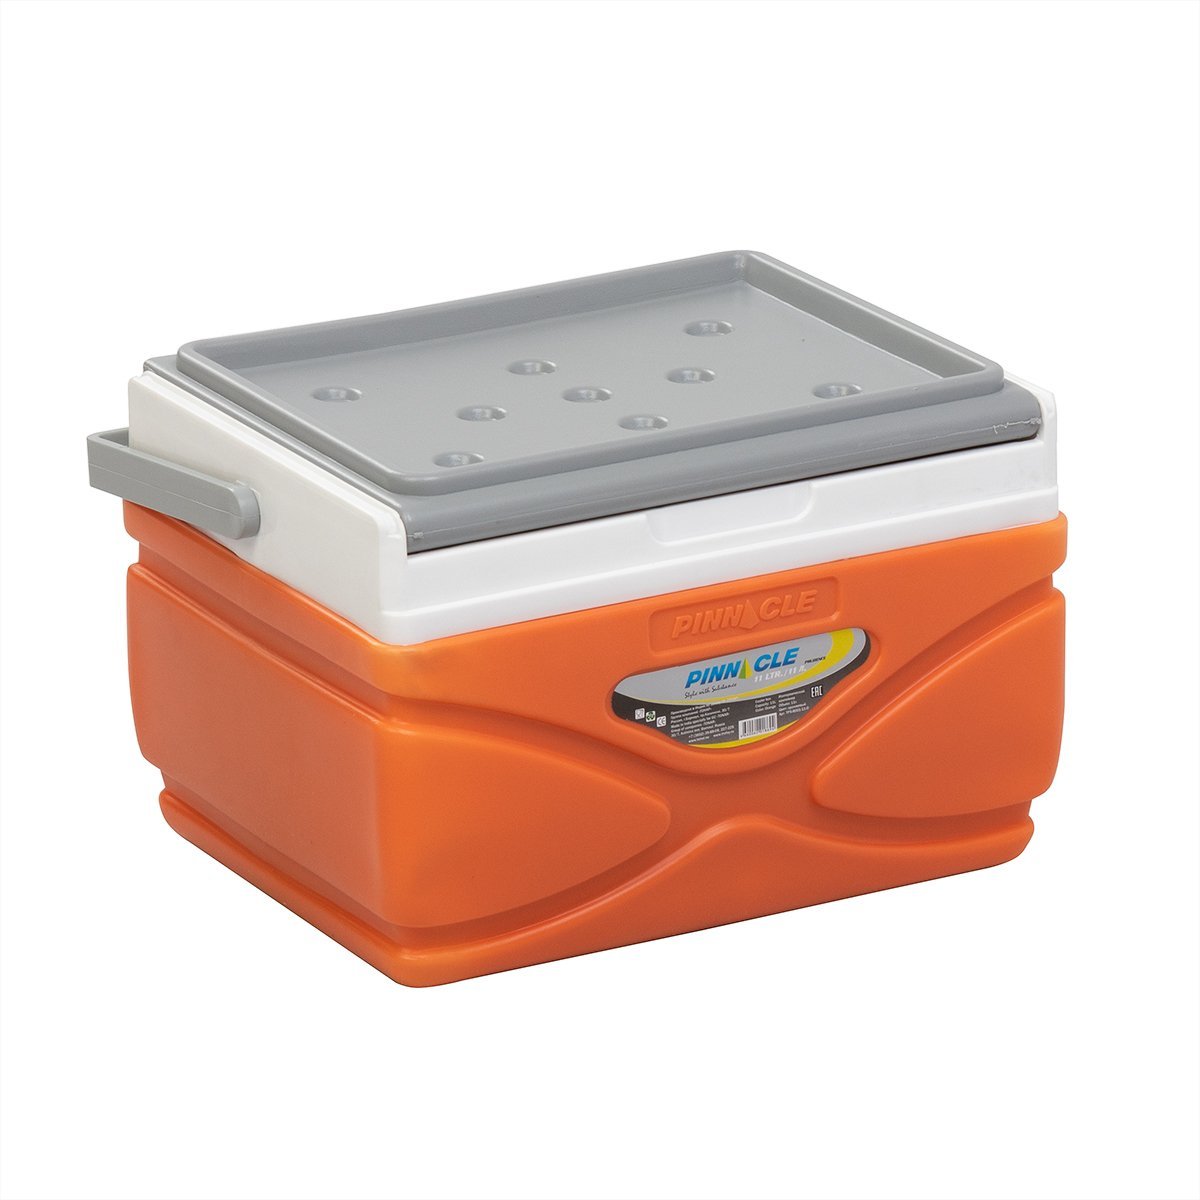 Prudence Portable Hard-Sided Ice Chest for Camping, 11 qt, with handle, orange color with a lid closed